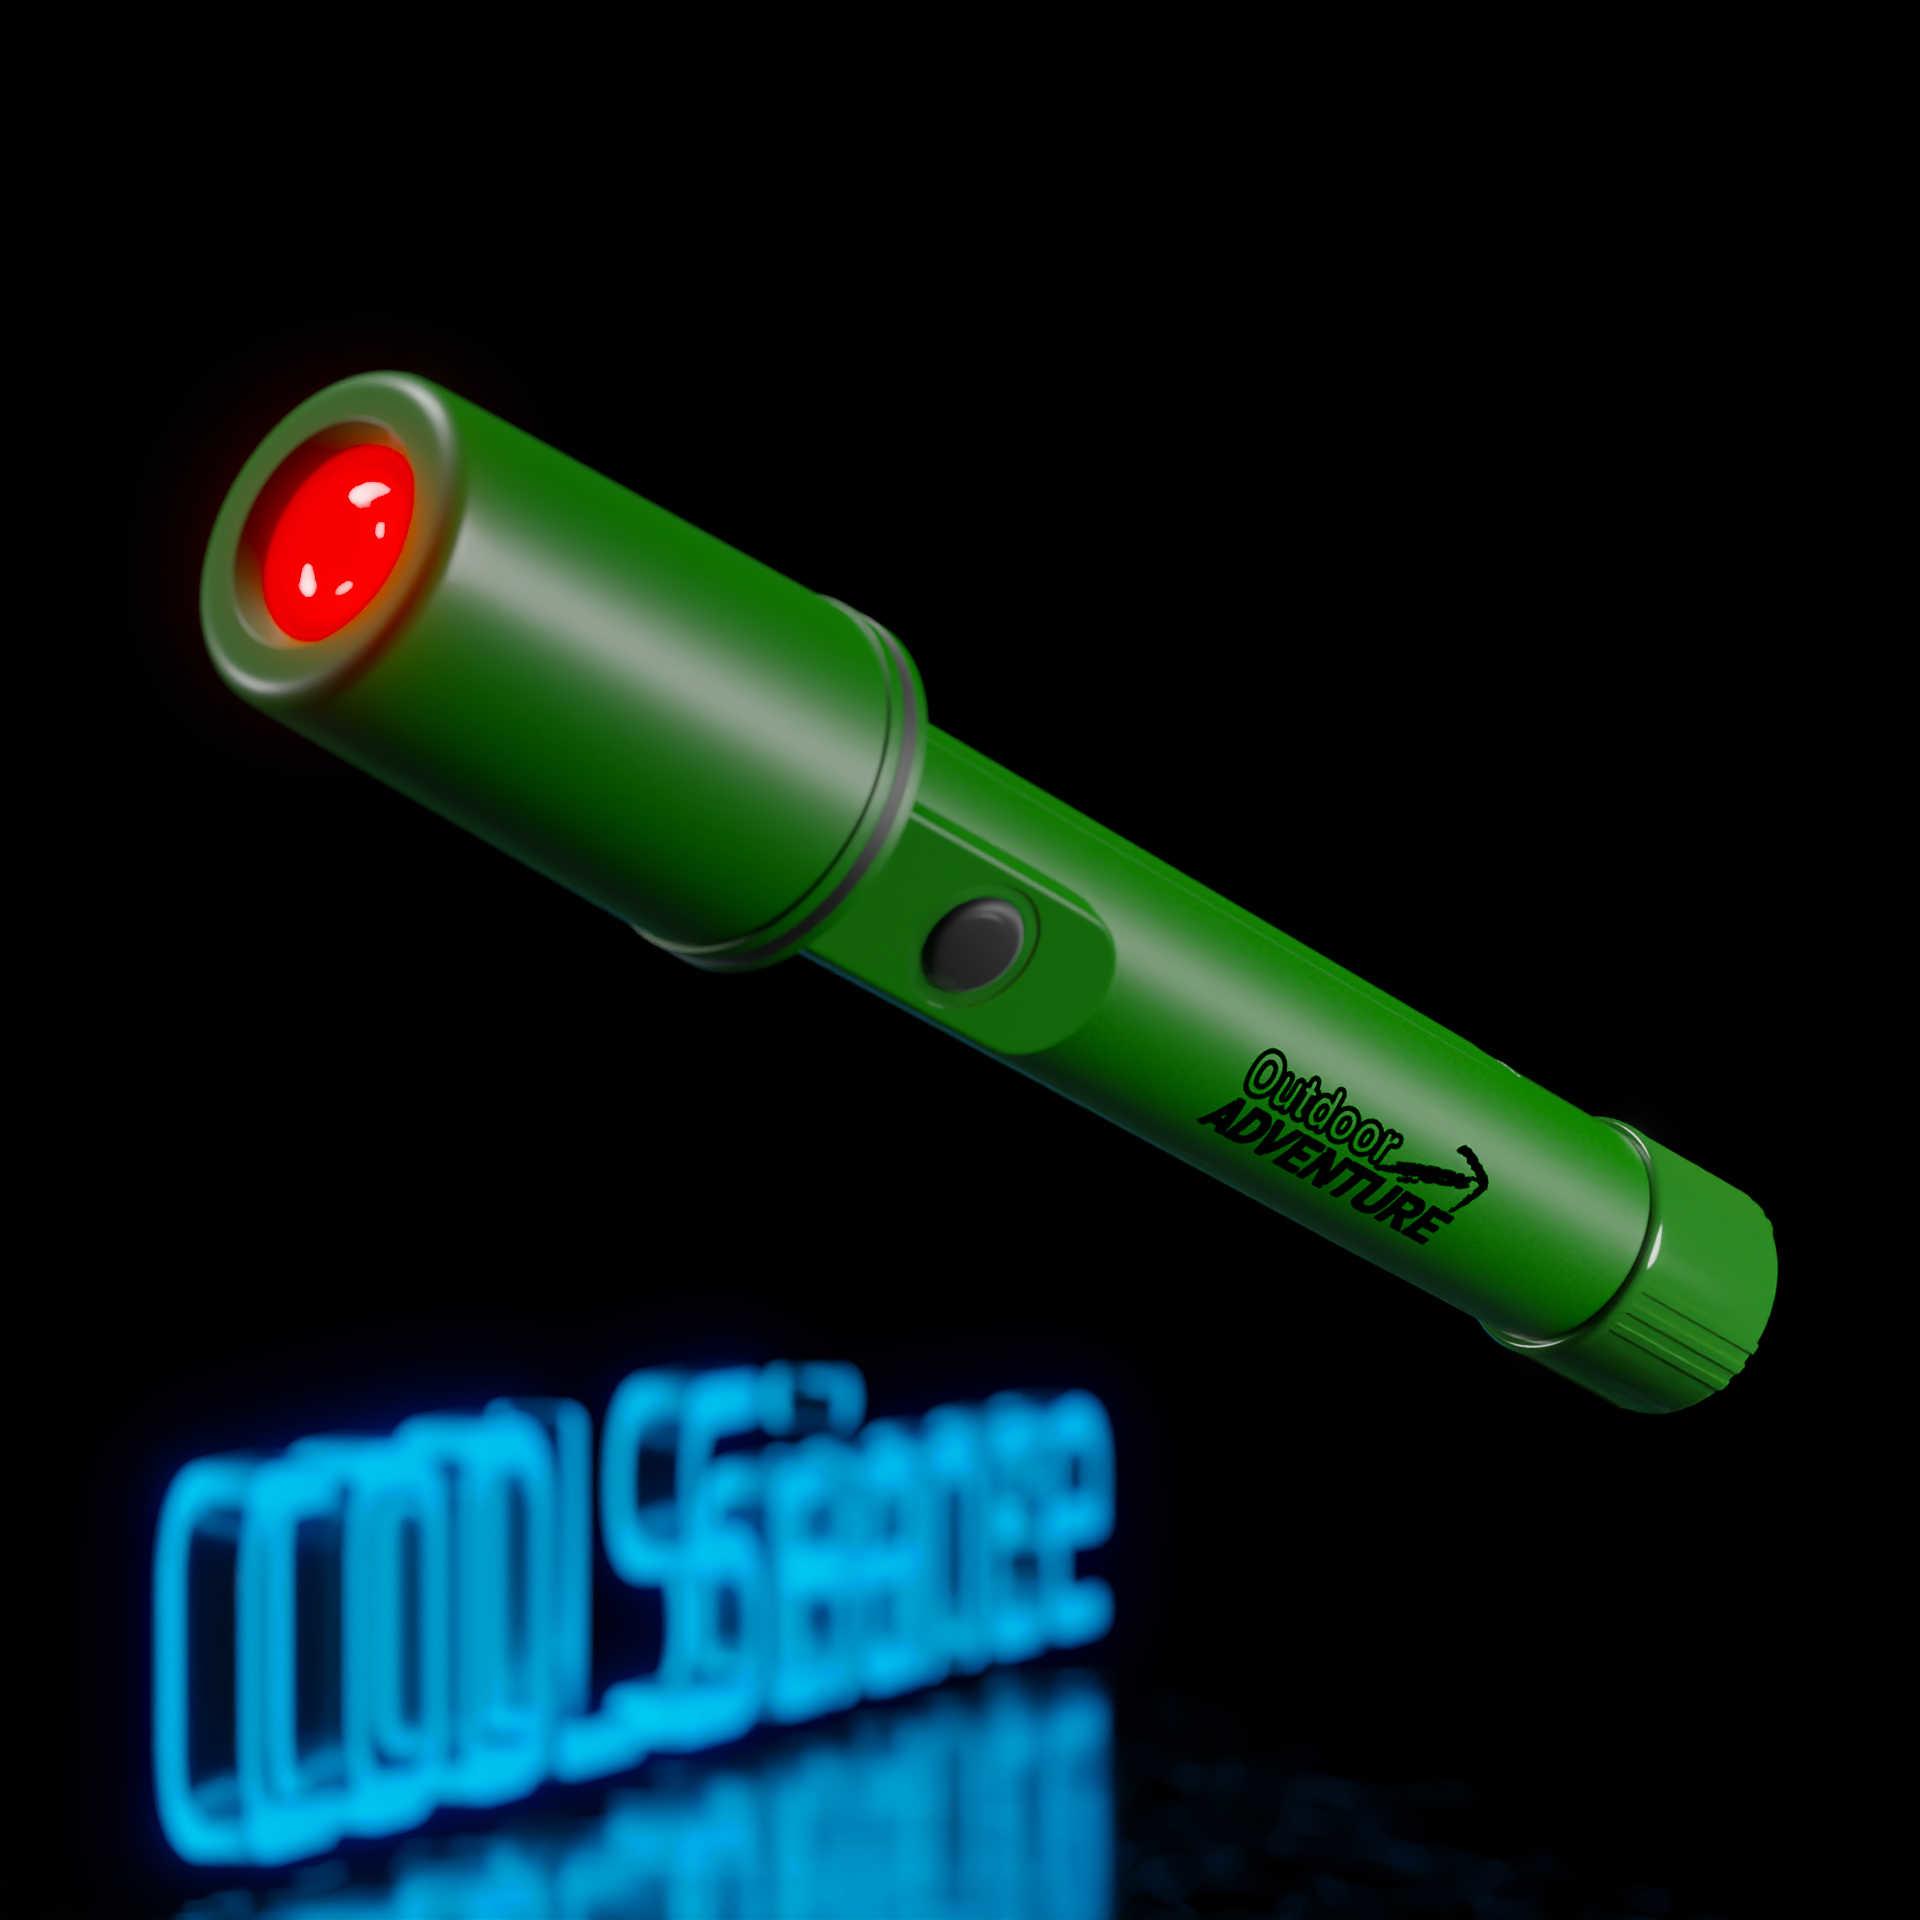 View of the Brainstorm Outdoor Adventure Night Vision Torch when switched on showing Red LED Light